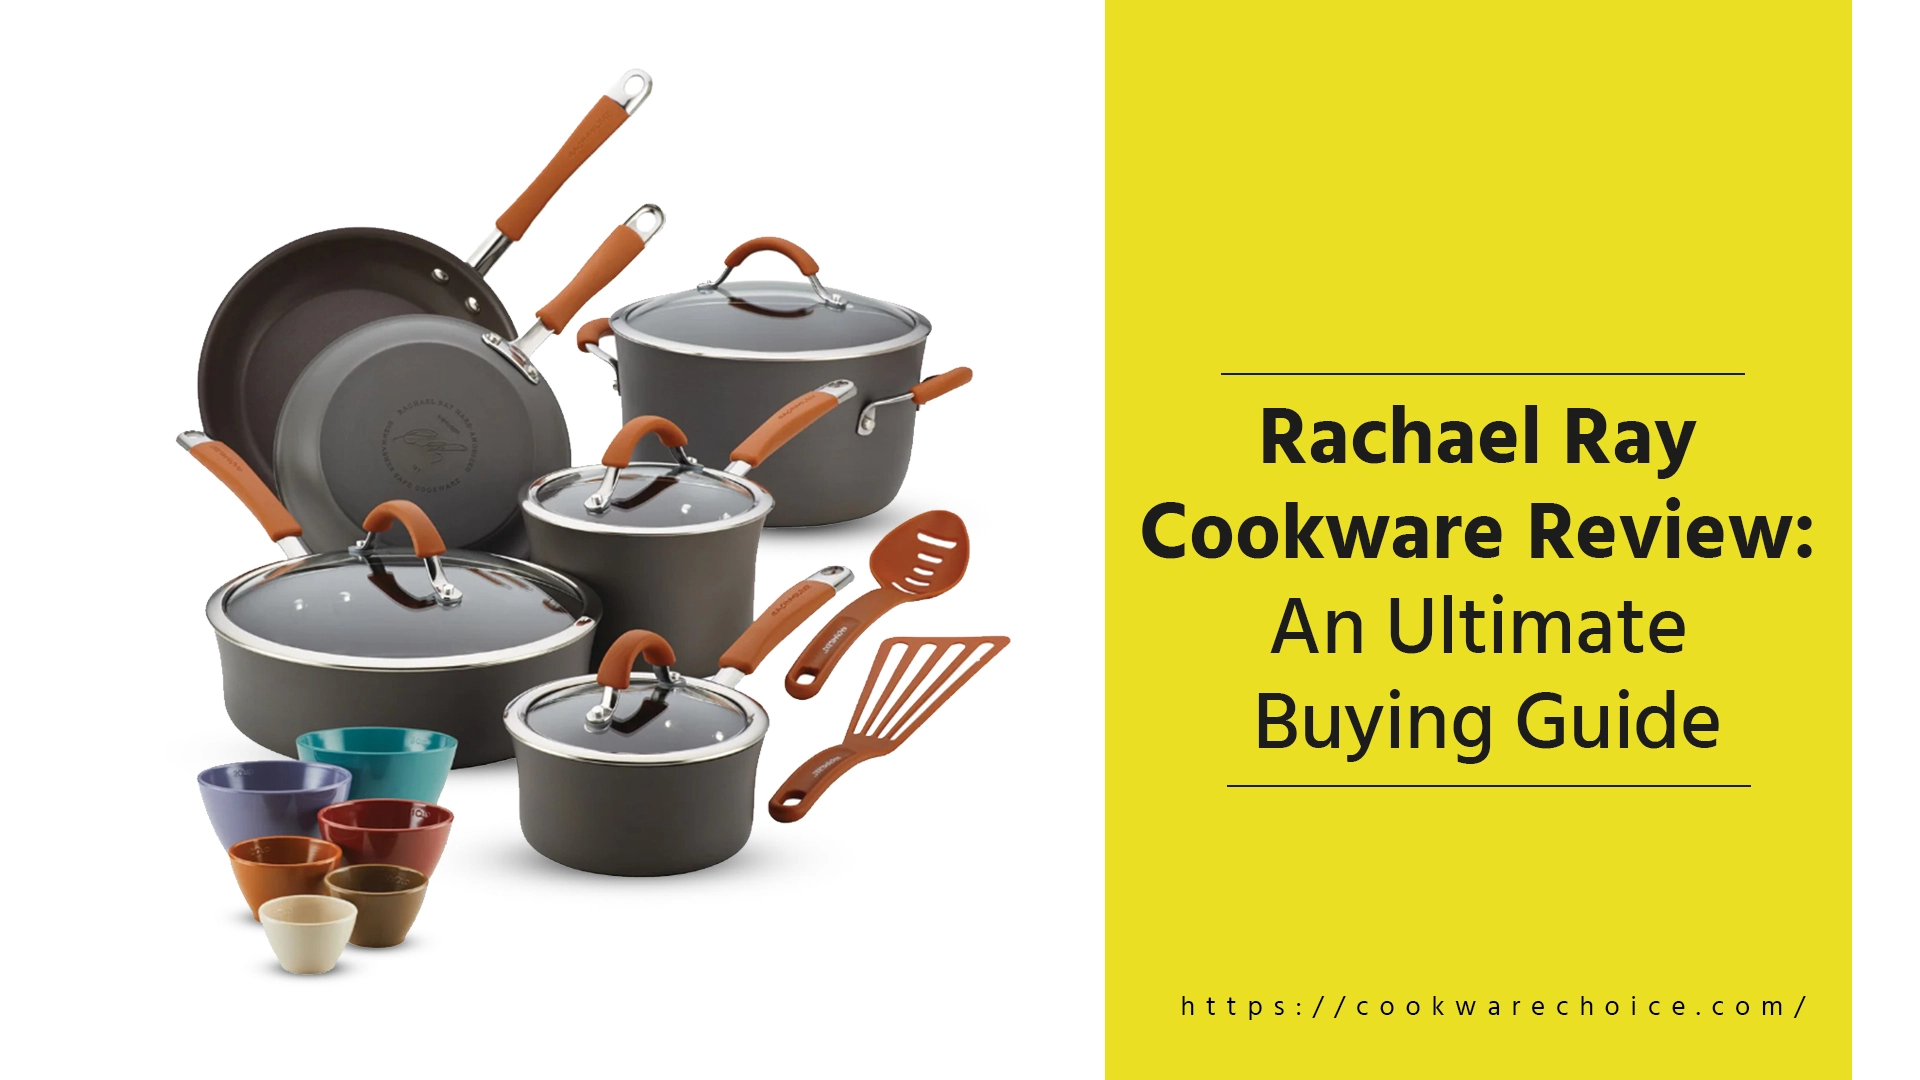 Rachael Ray Cookware Review: An Ultimate Buying Guide